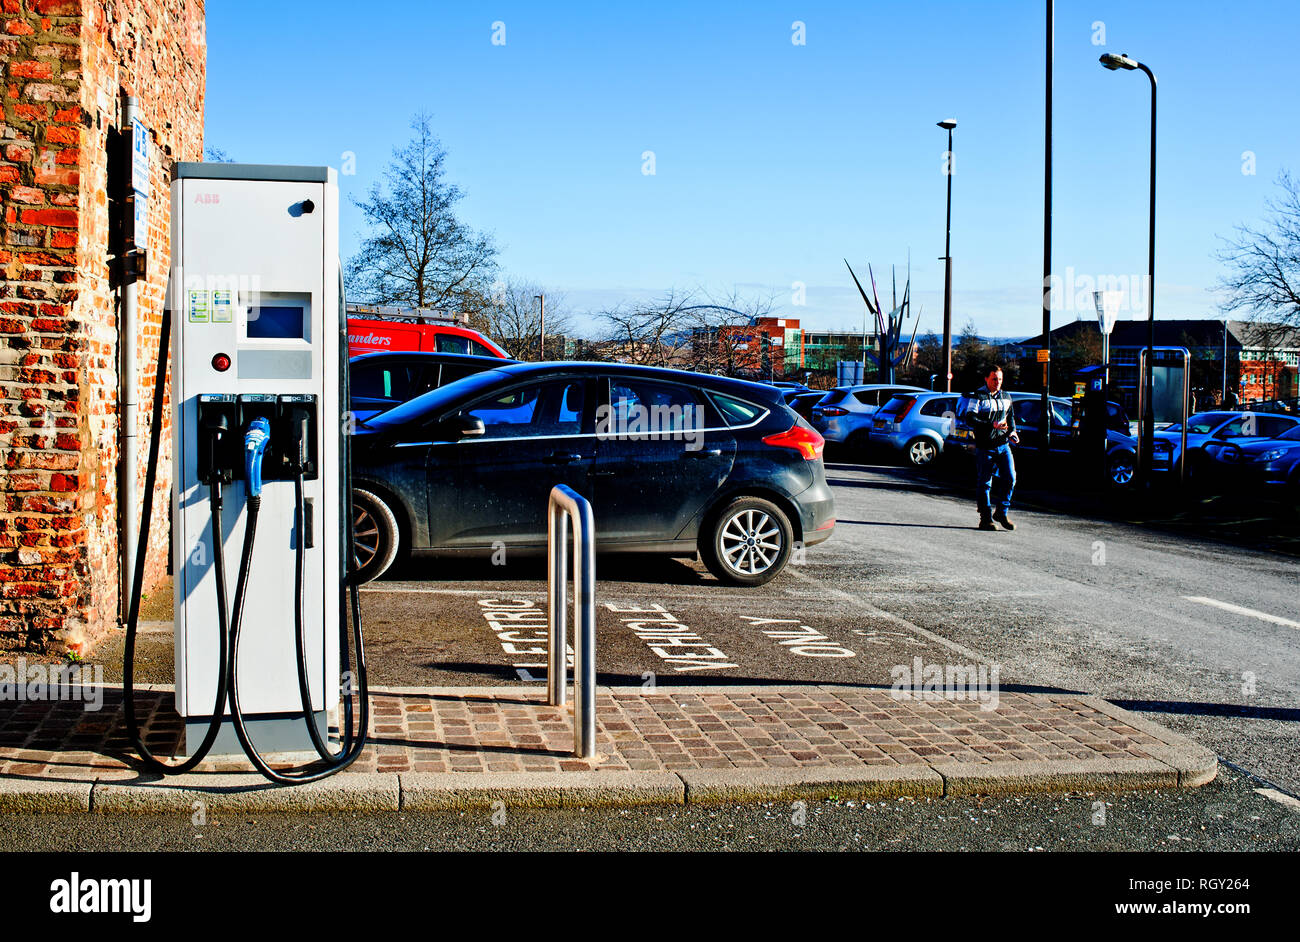 Electric Vehicle Charging Point, Knowles Street, Stockton on Tees, Cleveland, England Stock Photo